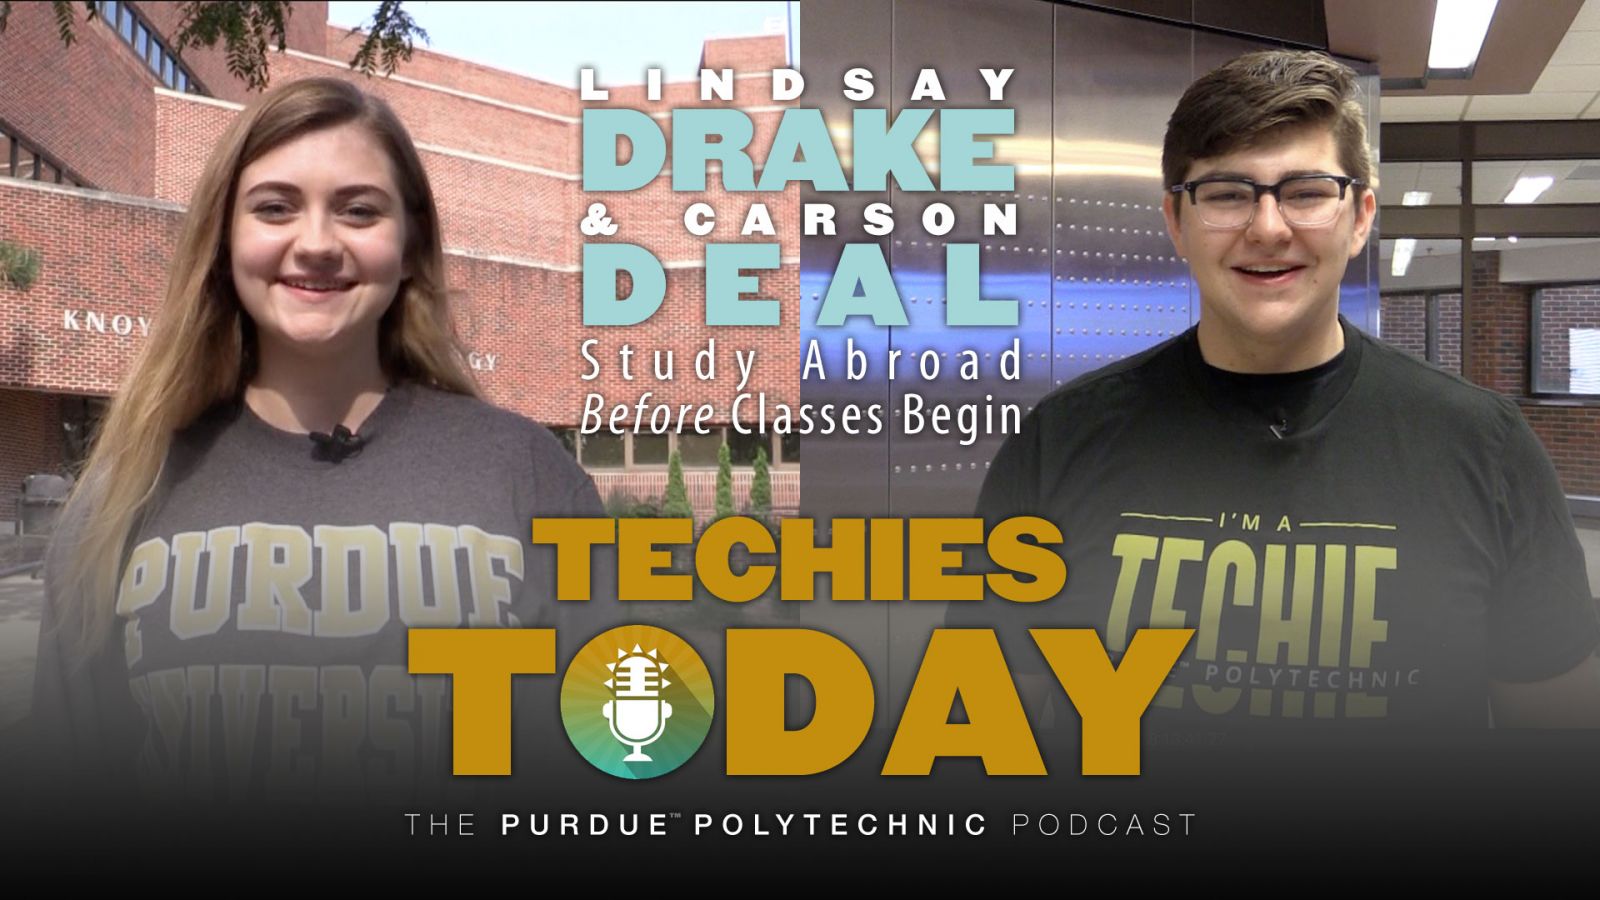 indsay Drake & Carson Deal, Study Abroad Before Classes Begin, on Techies Today, the Purdue Polytechnic Podcast